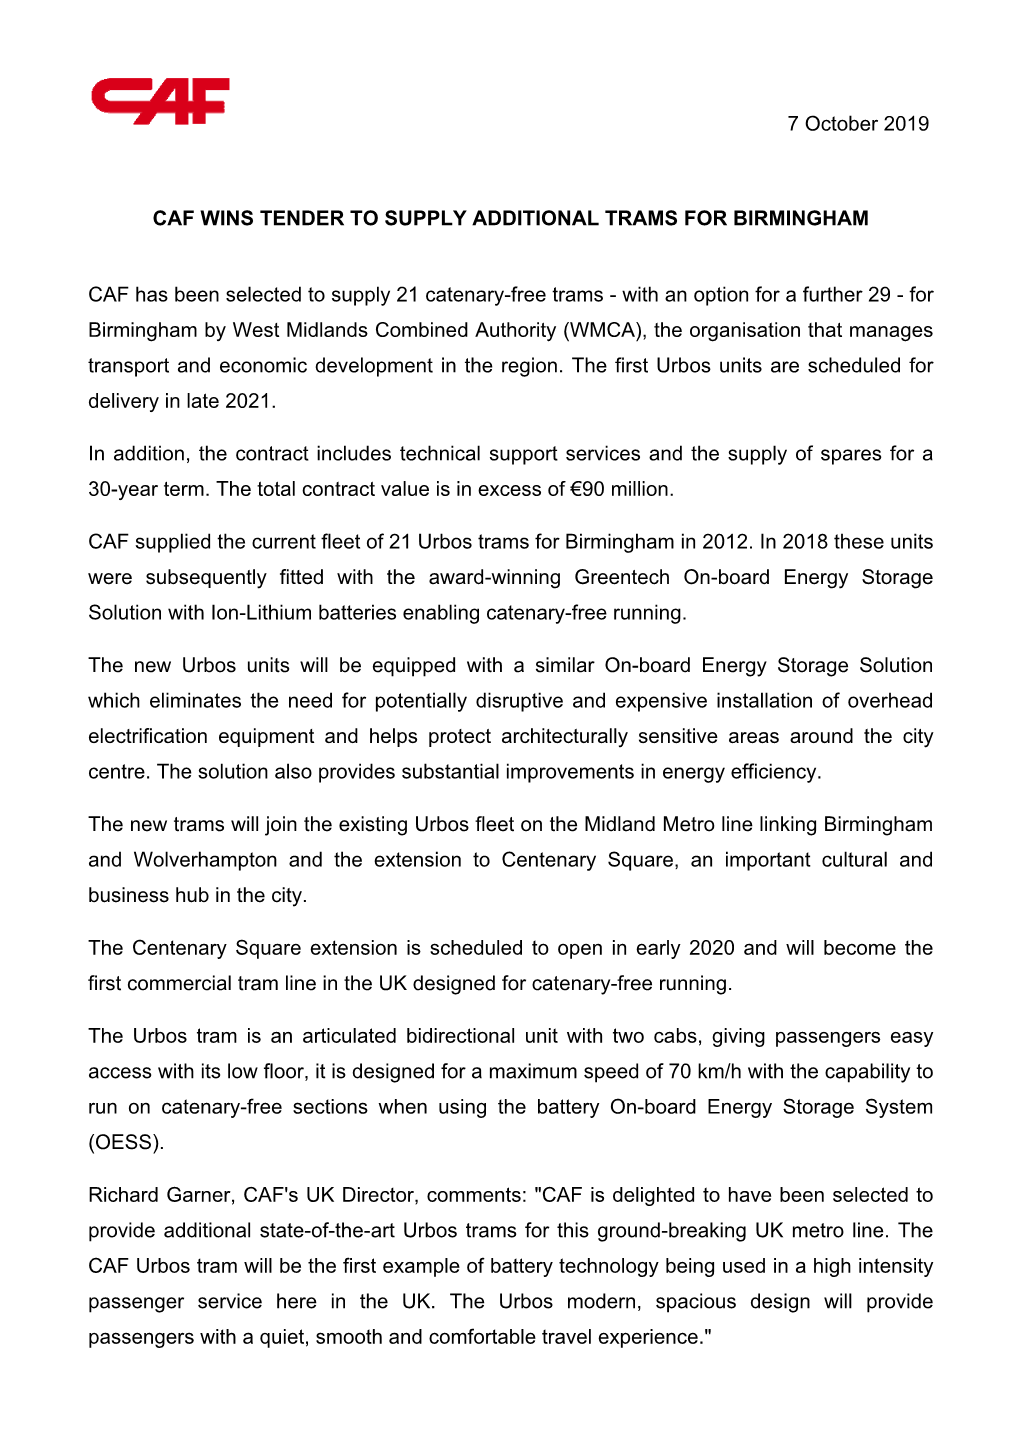 7 October 2019 CAF WINS TENDER to SUPPLY ADDITIONAL TRAMS